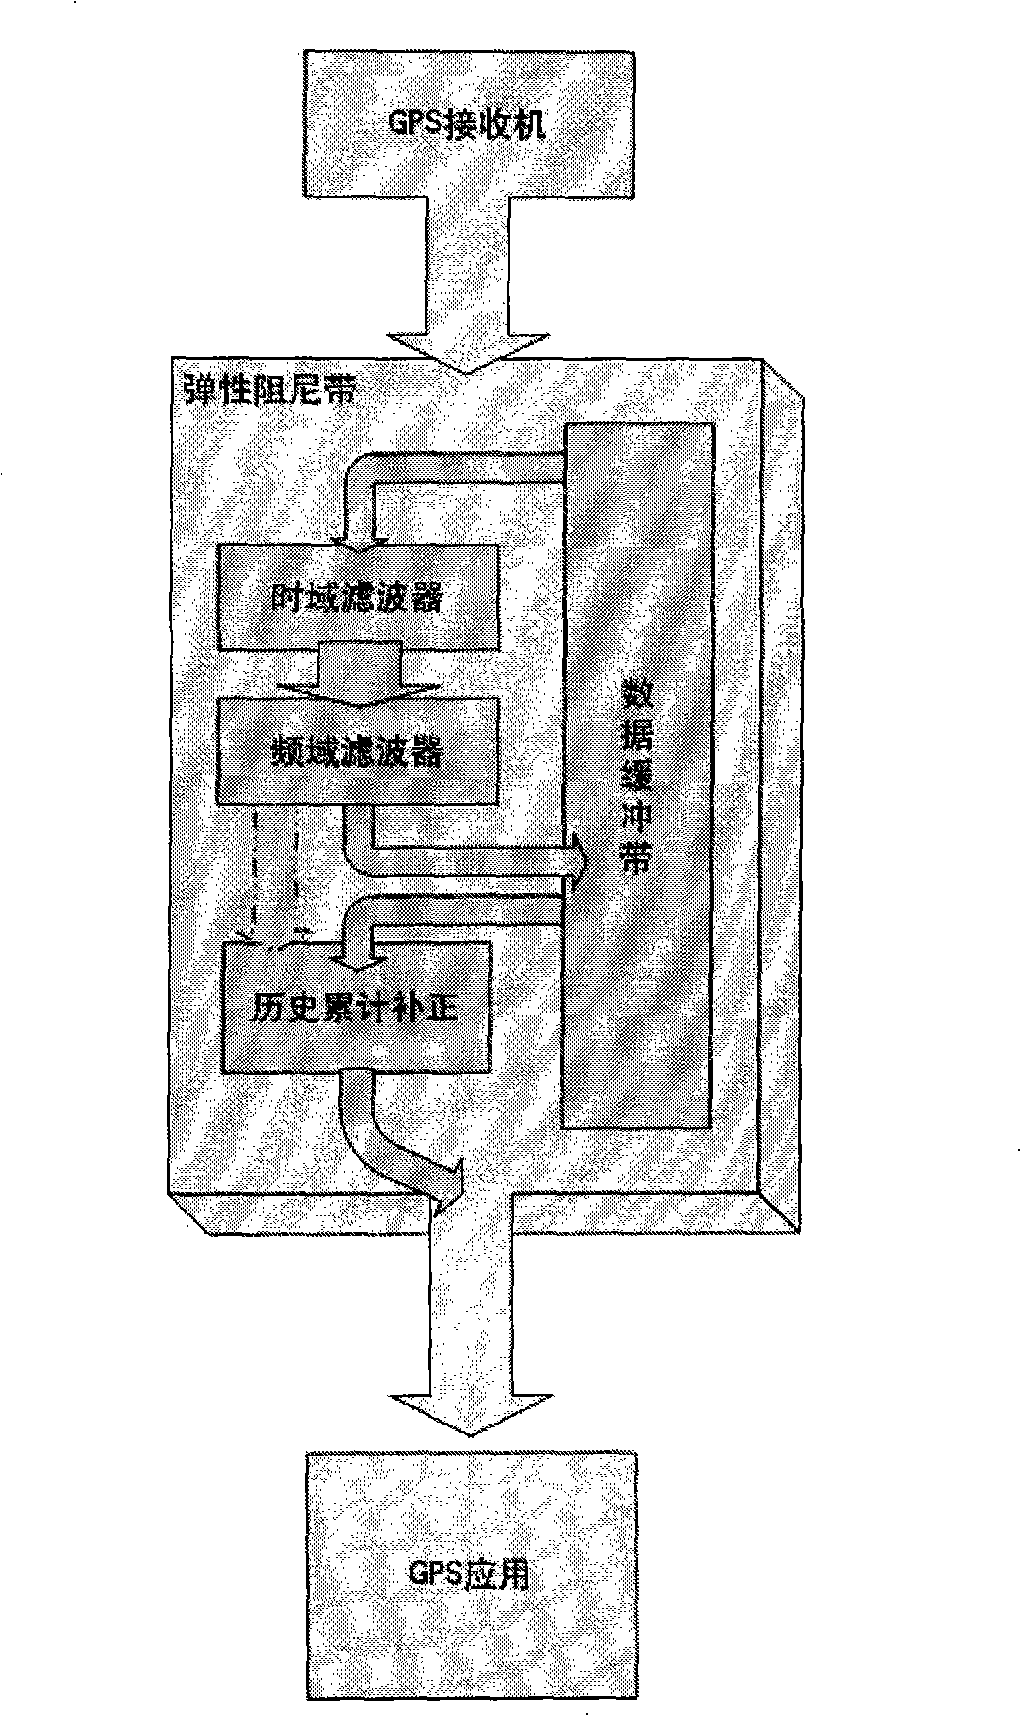 Intelligent navigation data logging device and method for improving navigation accuracy